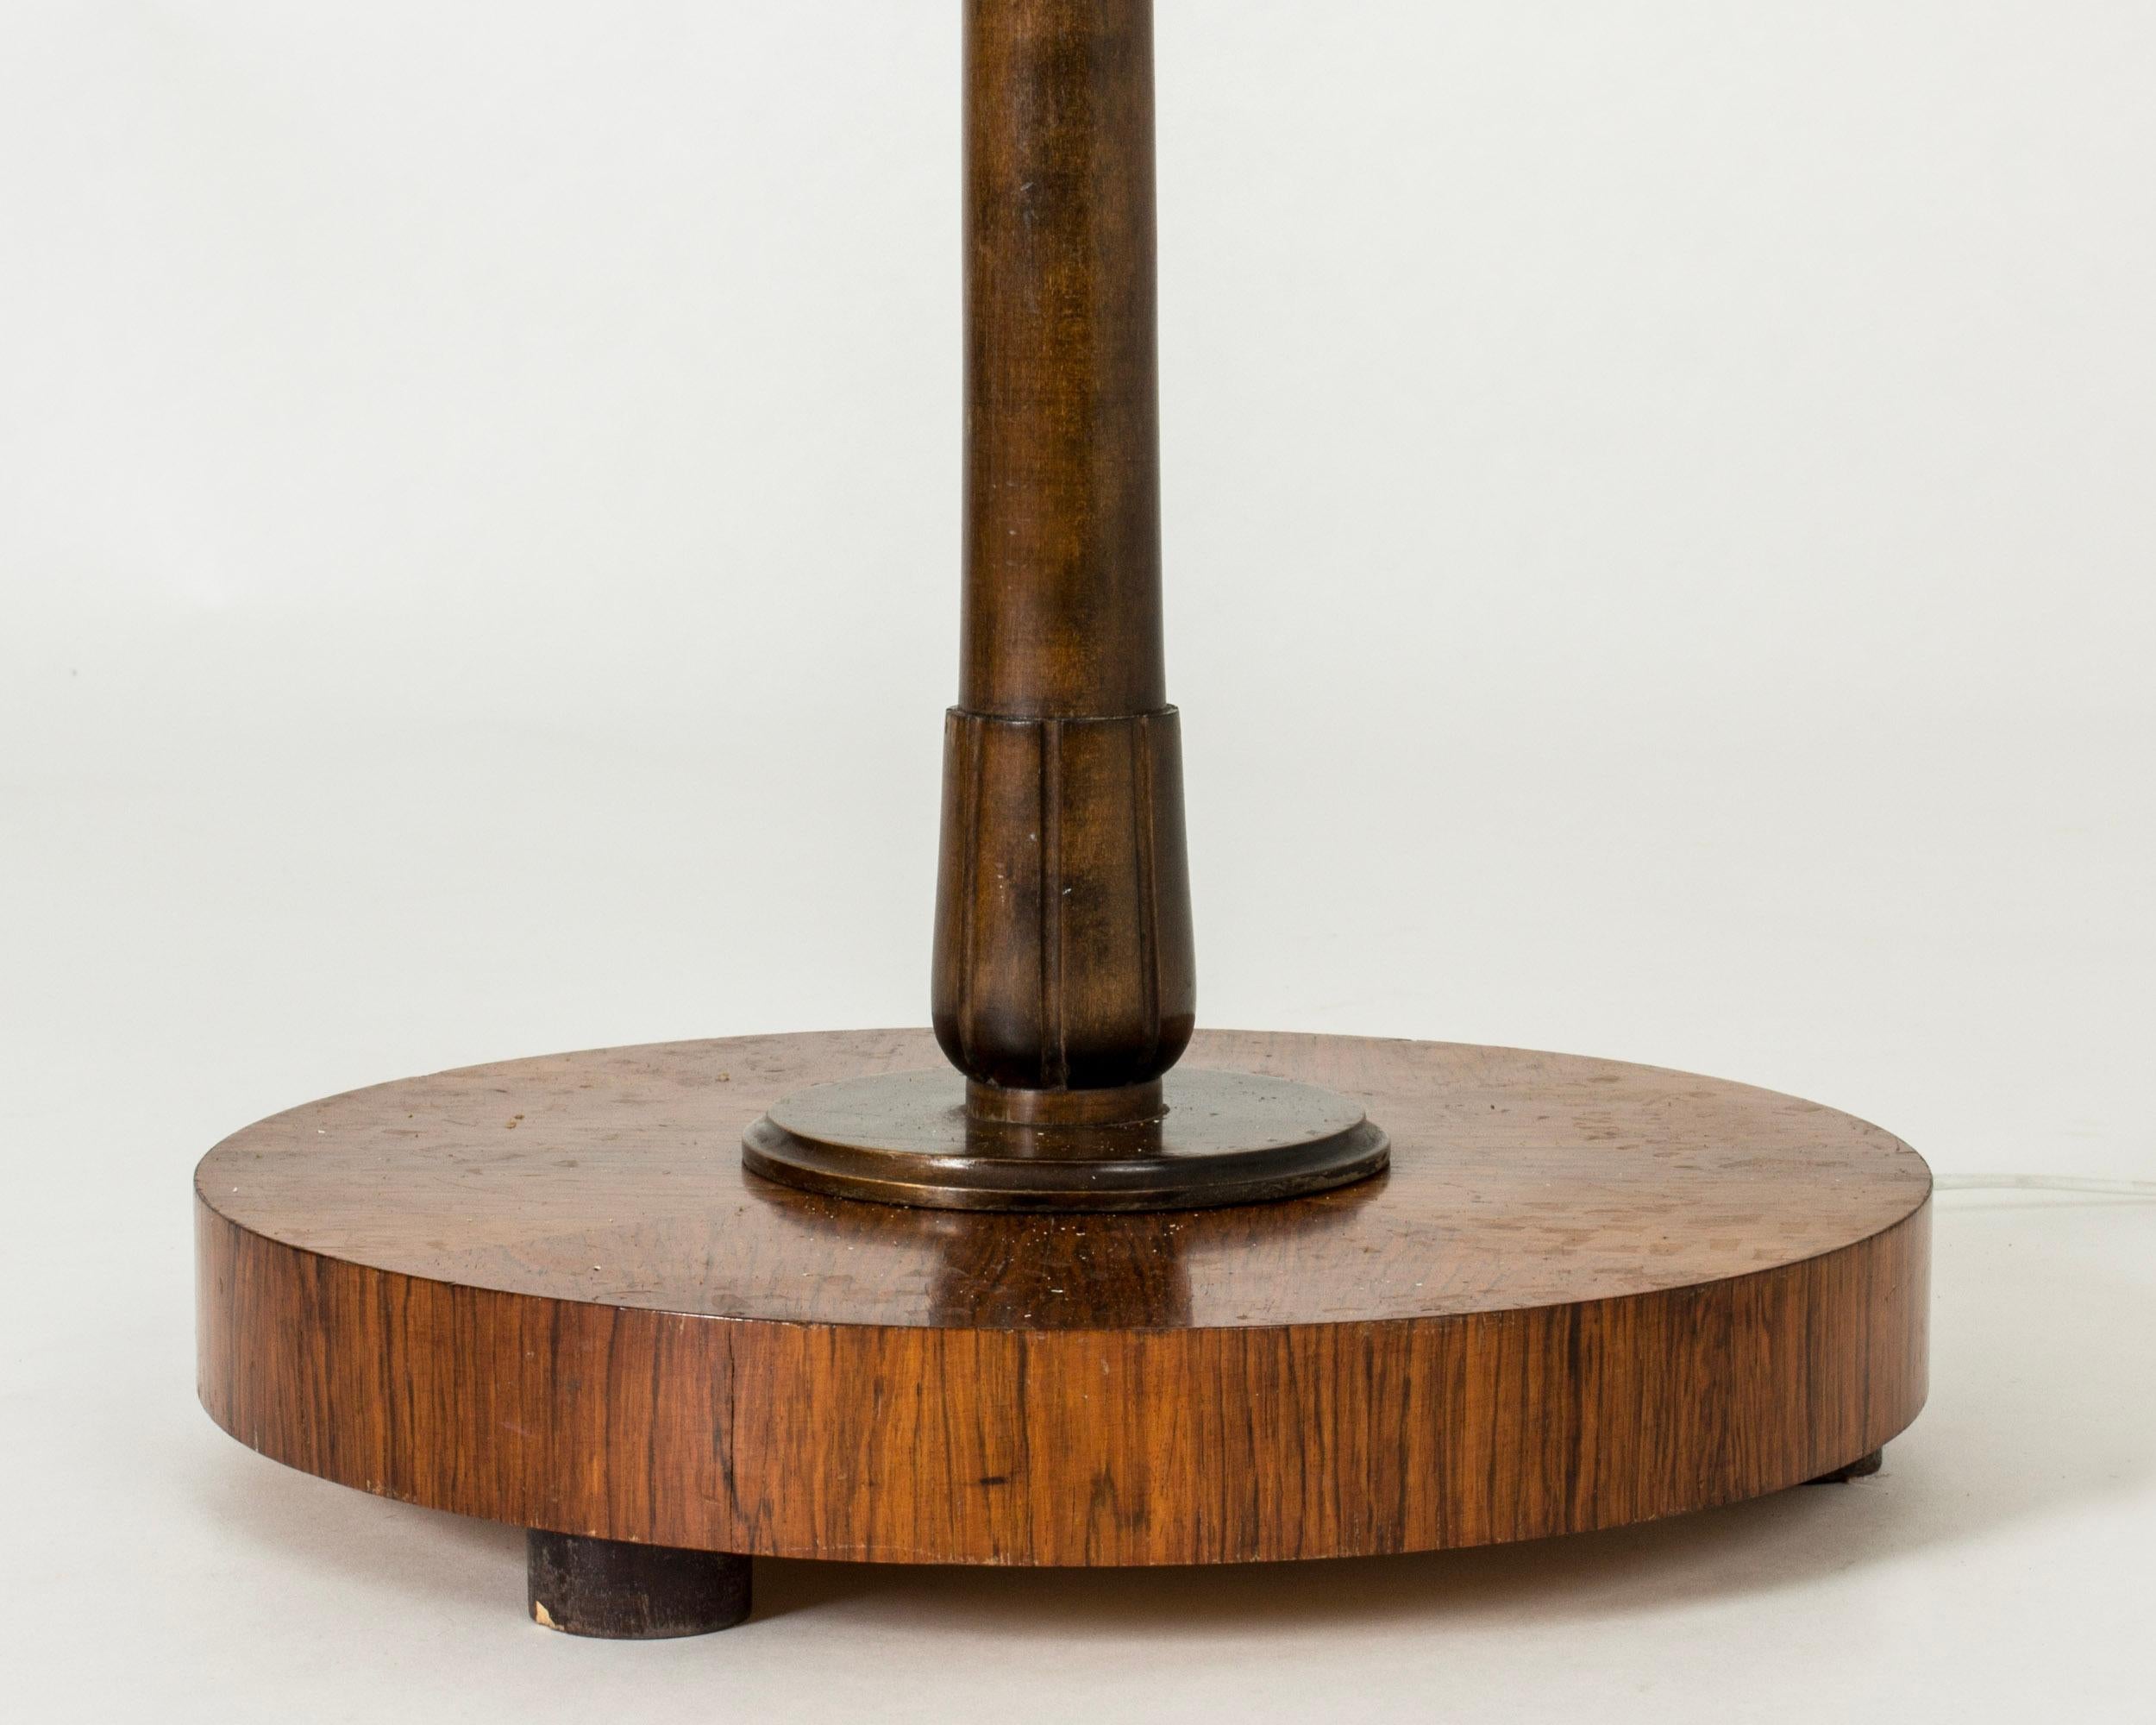 Swedish Modern floor lamp with inlays, Mjölby Intarsia, Sweden, 1930s For Sale 3